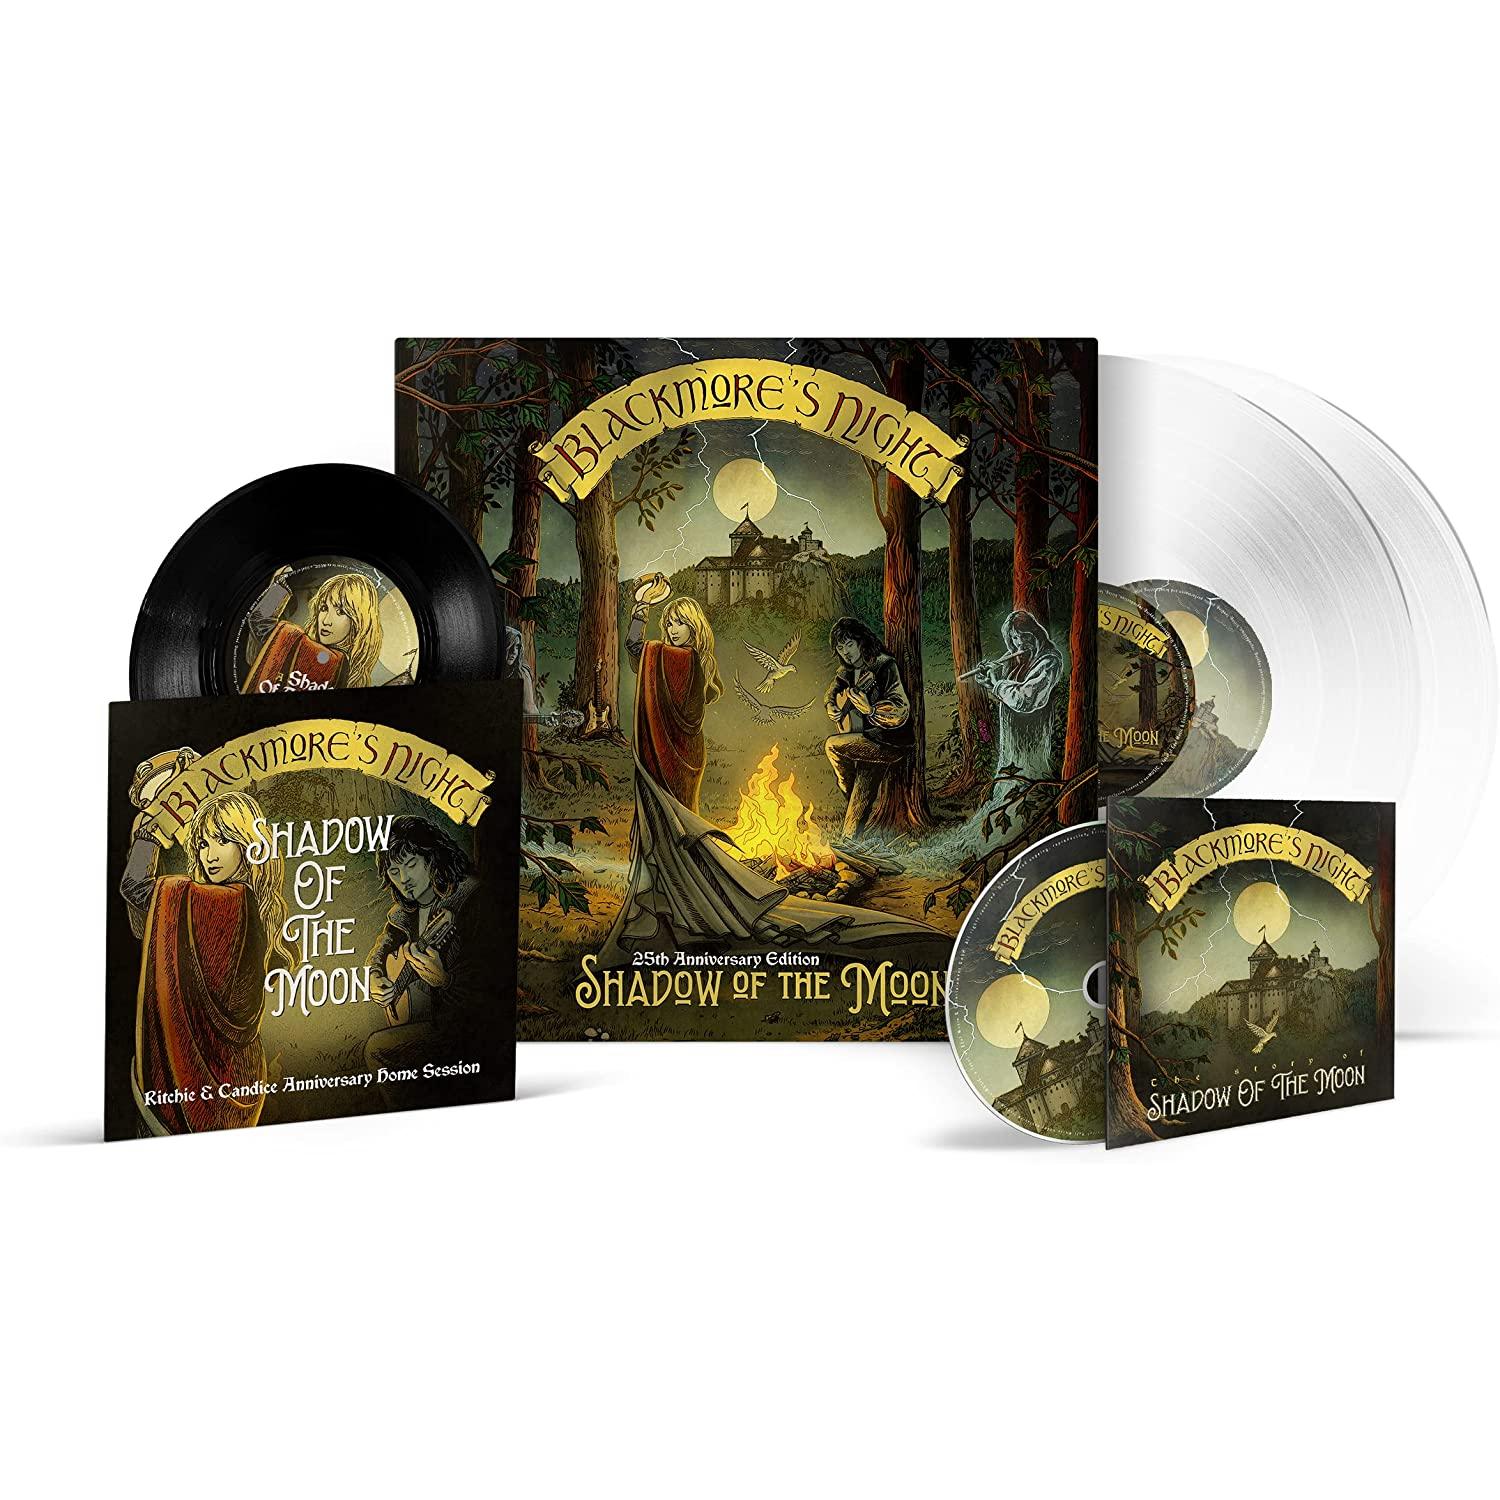 SHADOW OF THE MOON (25TH ANNIVERSARY LIMITED CRYSTAL CLEAR VINYL EDITION)